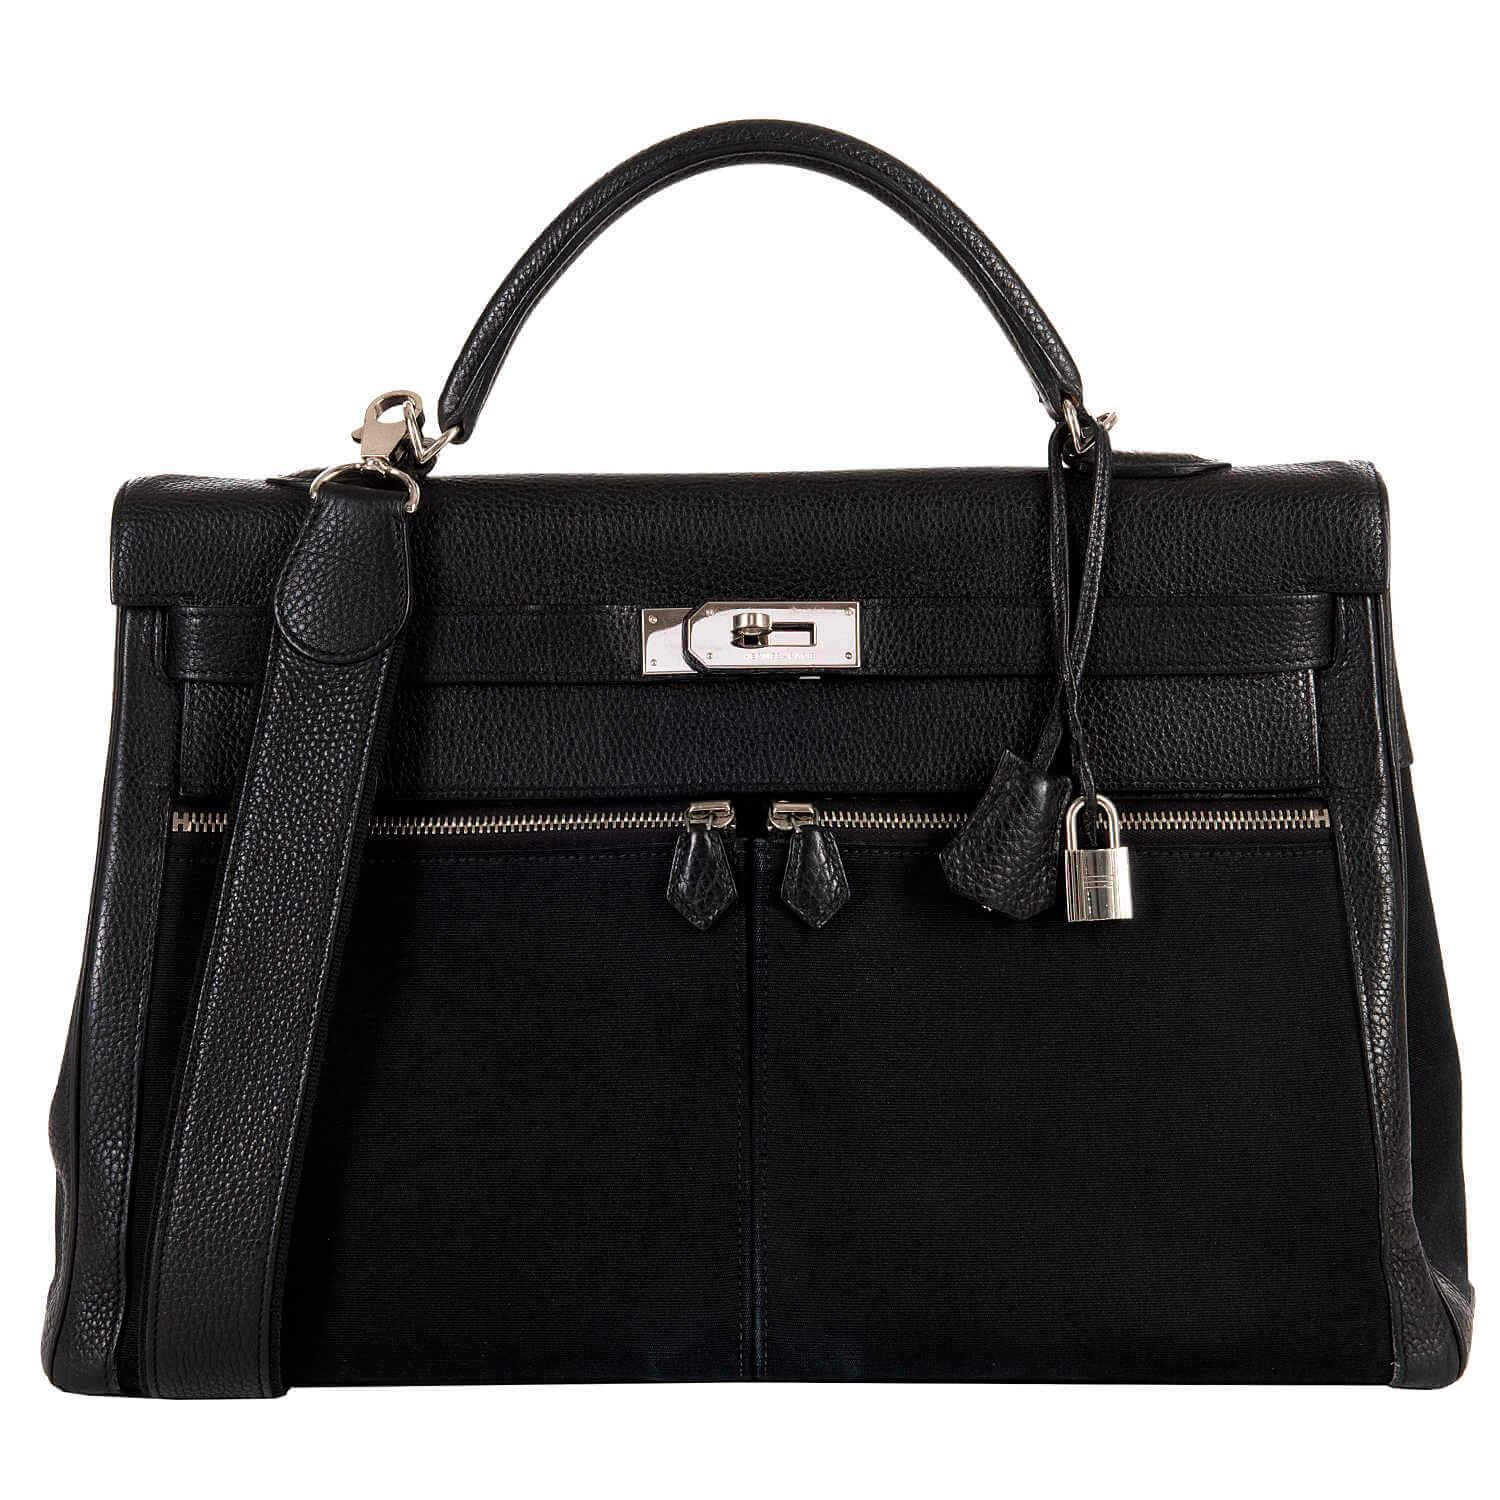 The Hermes Kelly 'Lakis' Bag is a unique take on the classic, famous and always fashionable Kelly style. Originally created exclusively for Jackie Onassis, the Lakis bag is very rare and highly collectable. The 'Lakis' has updated the demure Kelly